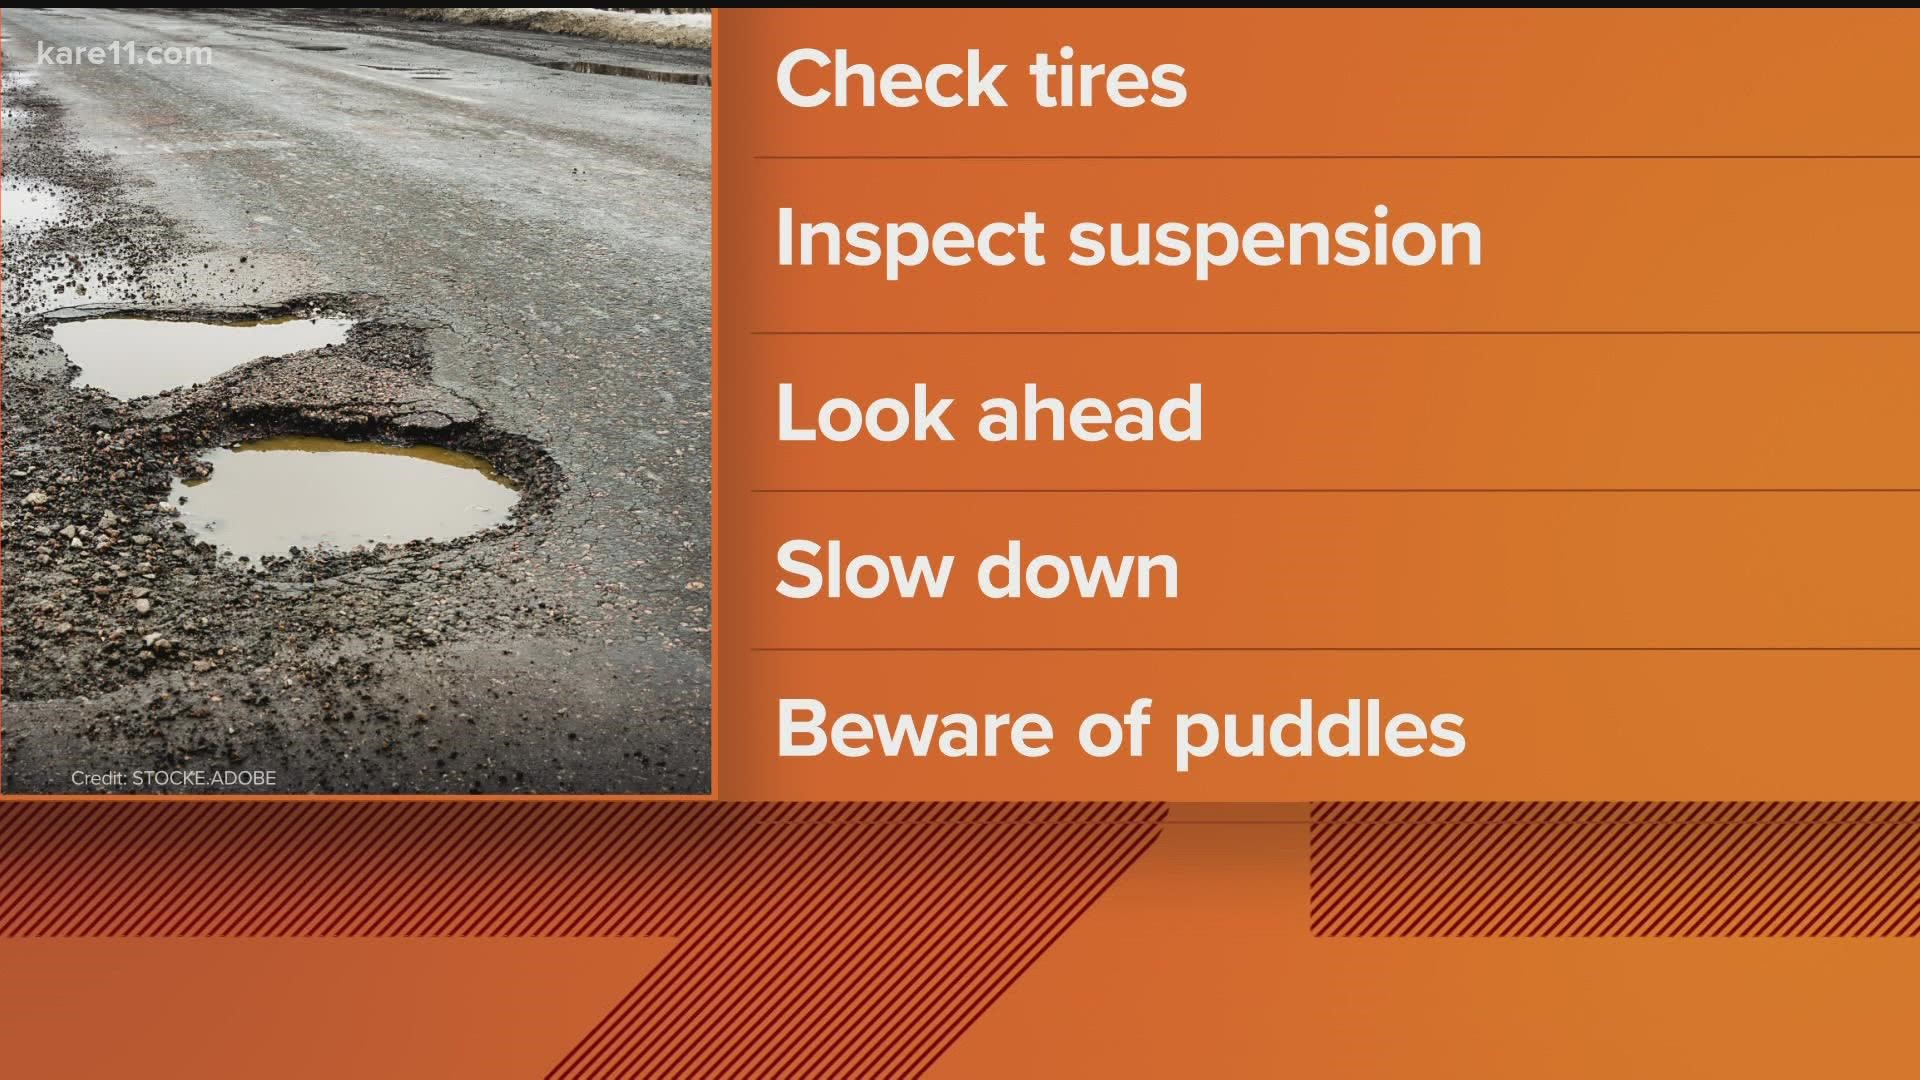 In 2021, 1 in 10 drivers sustained significant damage from hitting a pothole.